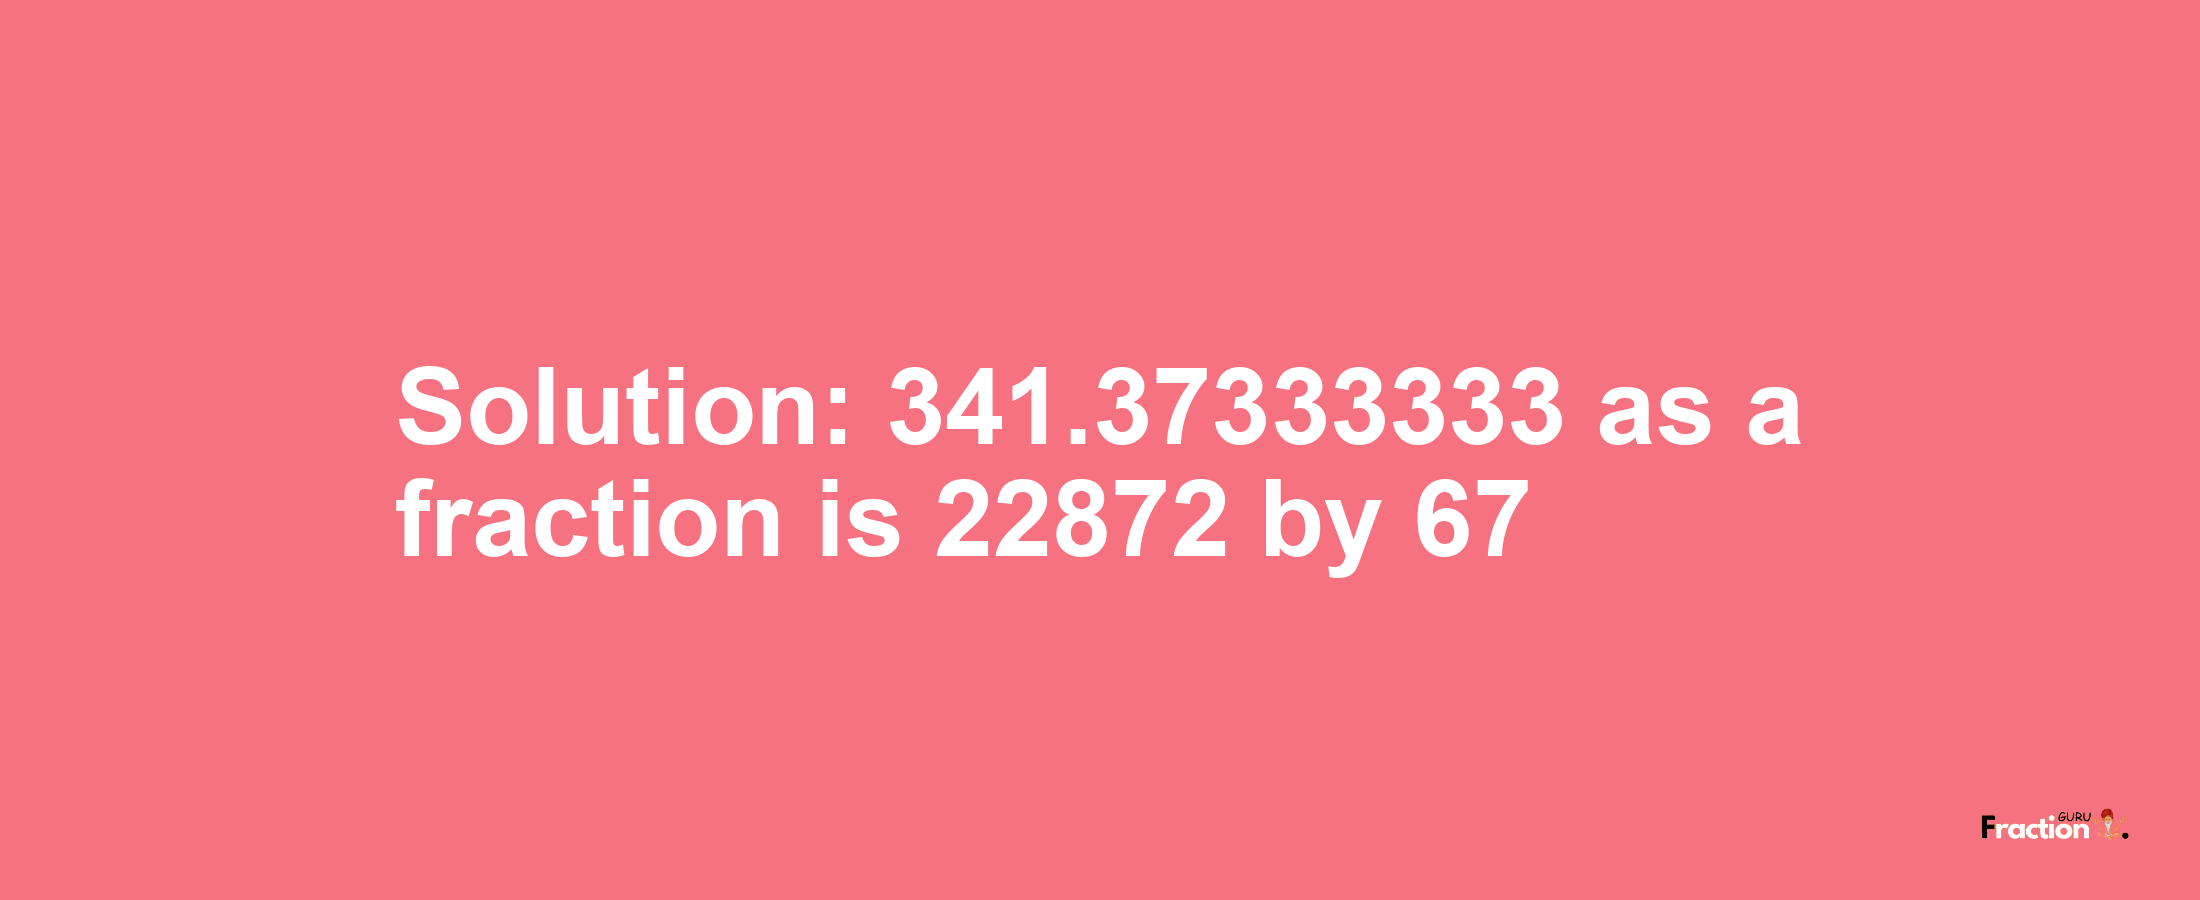 Solution:341.37333333 as a fraction is 22872/67